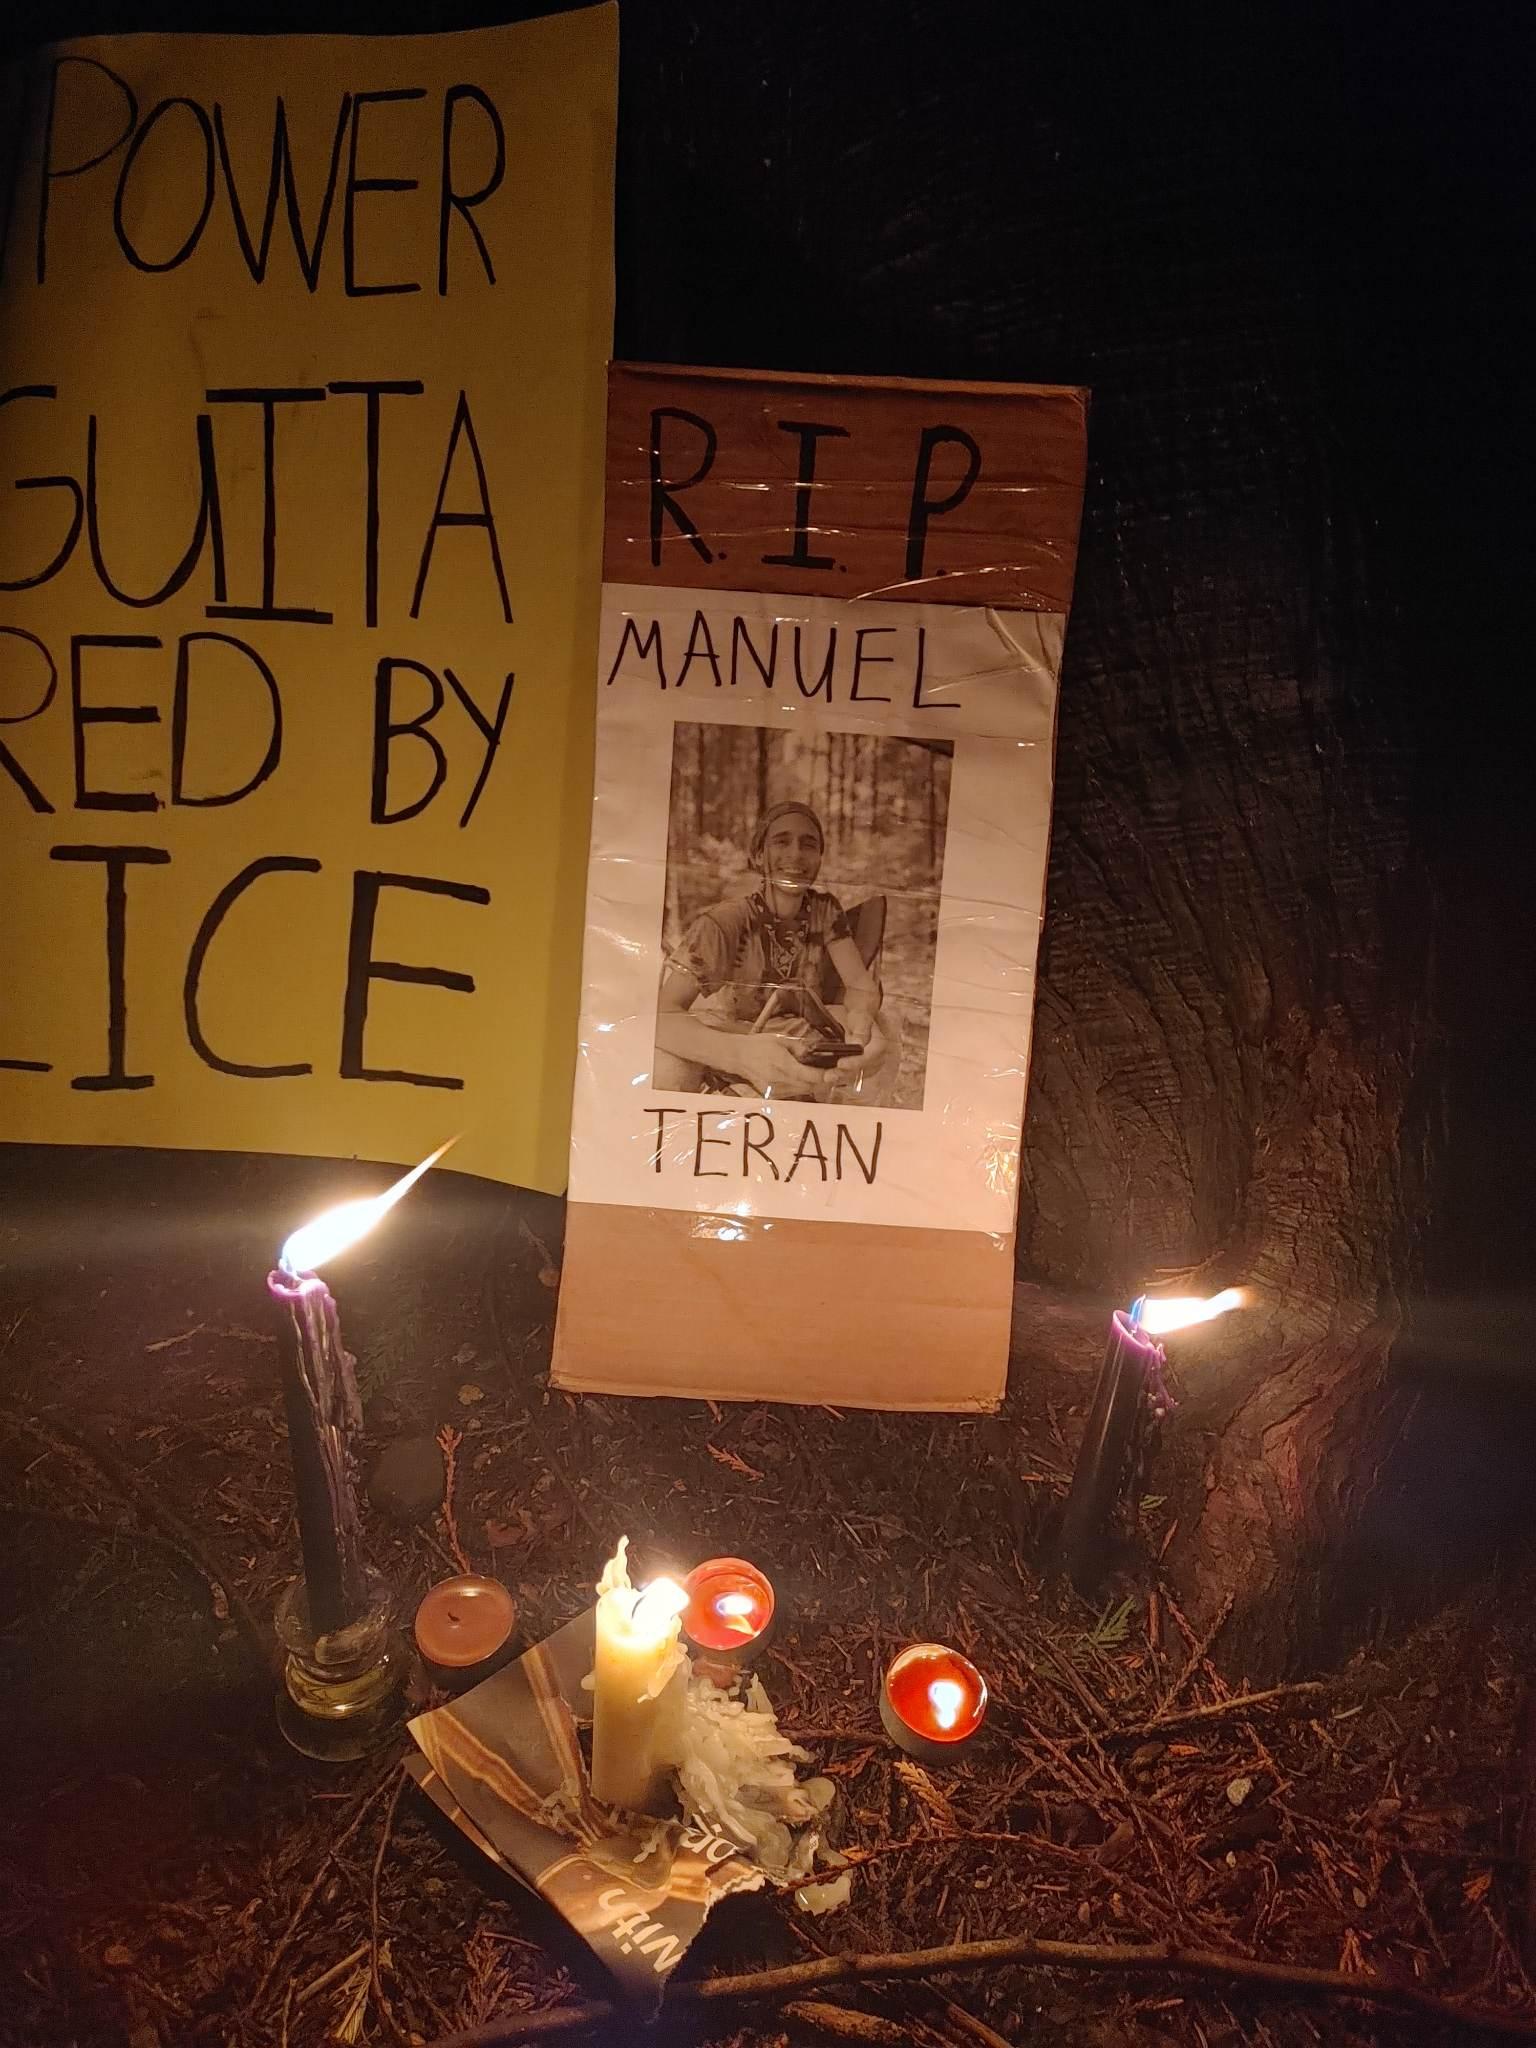 A picture of Tortuguita with the words RIP above it is lit by several vigil candles. Just out of frame is a sign upon which only the letters "GUITA- RED BY- ICE" are visible because the sign is out of frame.